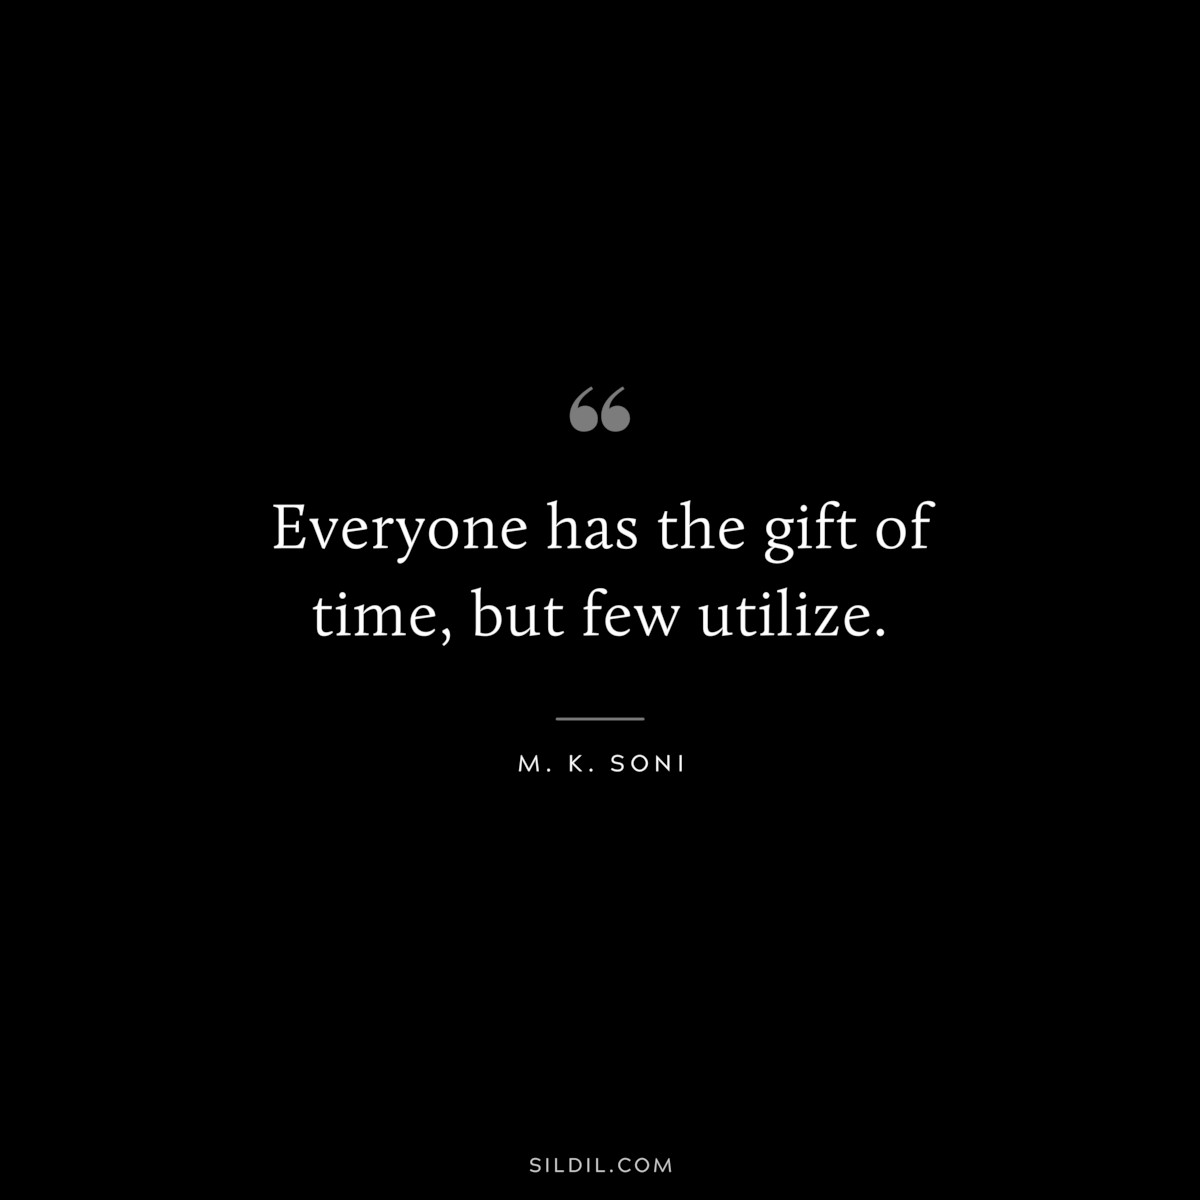 Everyone has the gift of time, but few utilize. ― M. K. Soni